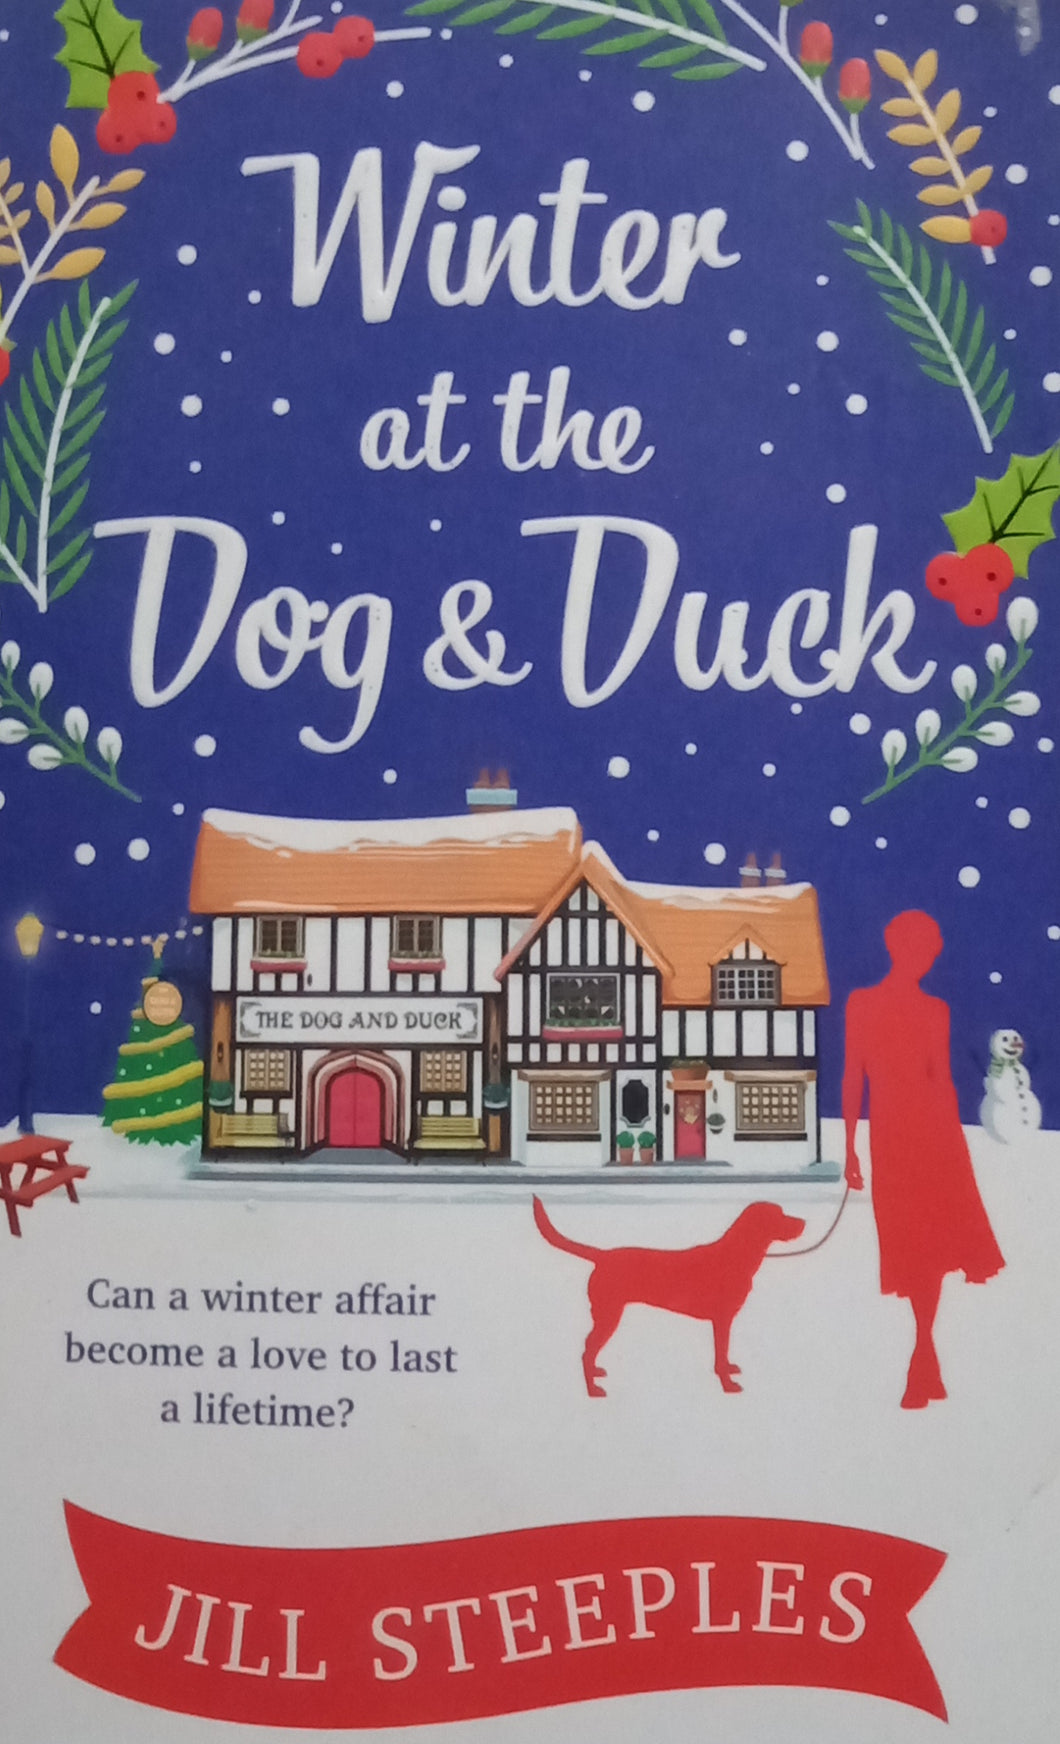 Winter At The Dog & Duck by Jill Steeples